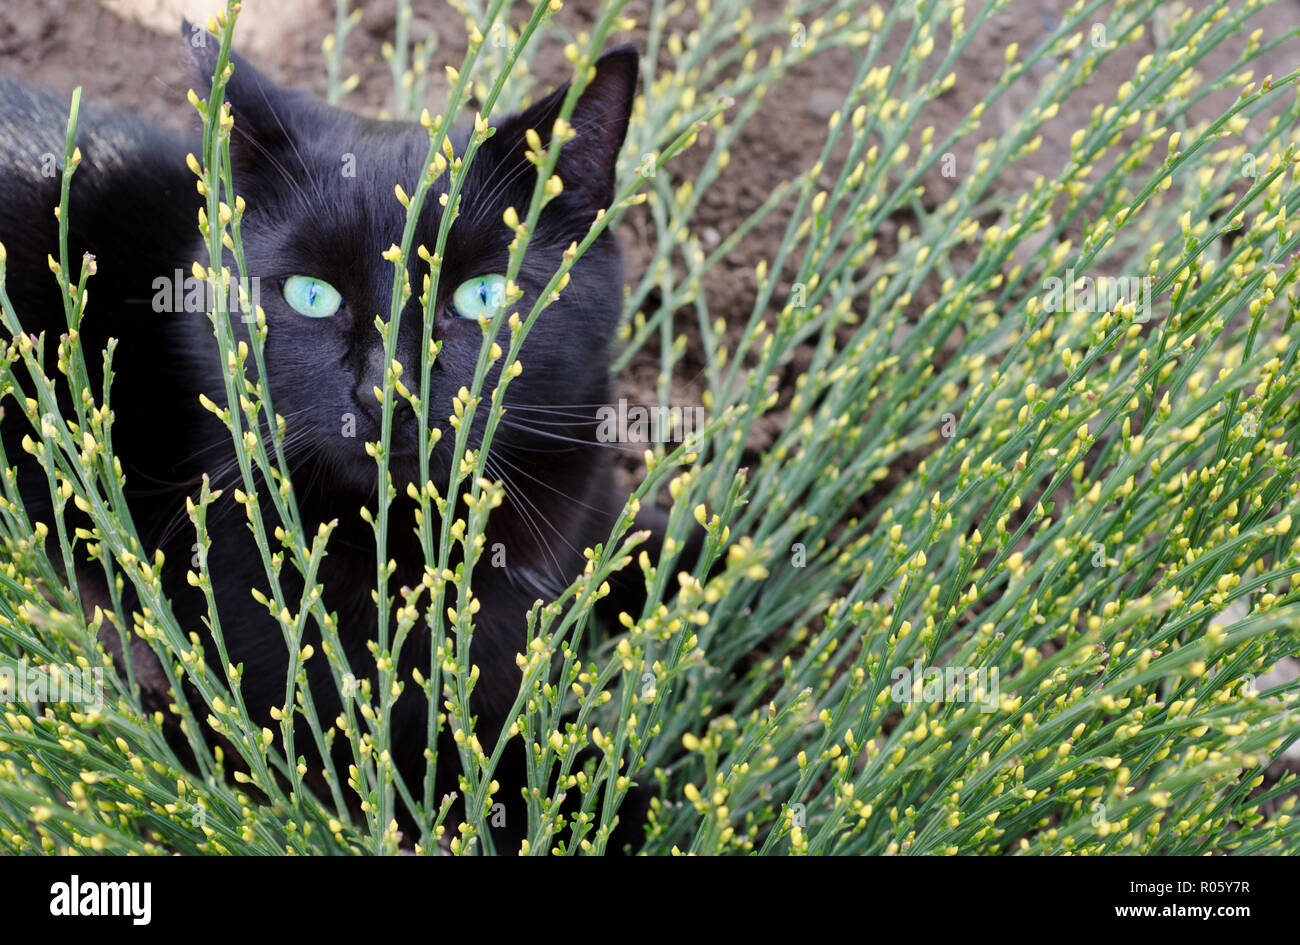 A black cat peeking out from behind a flowering plant. Stock Photo